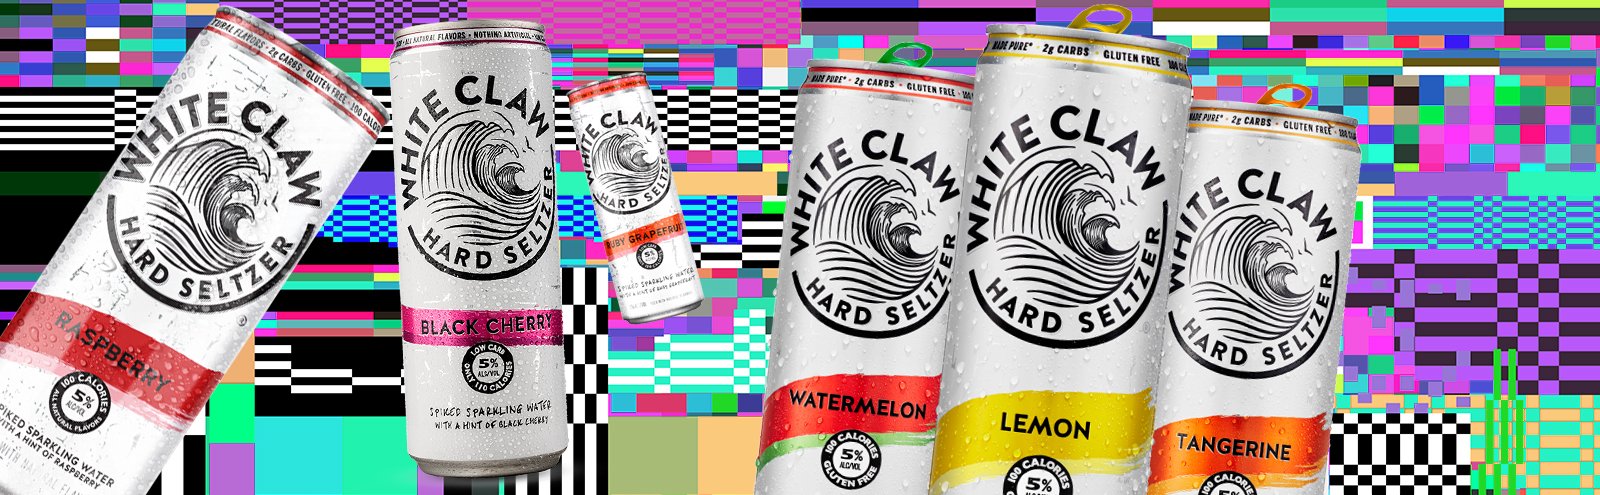 The Memes Are Pouring The White Claw Down Your Throat The New